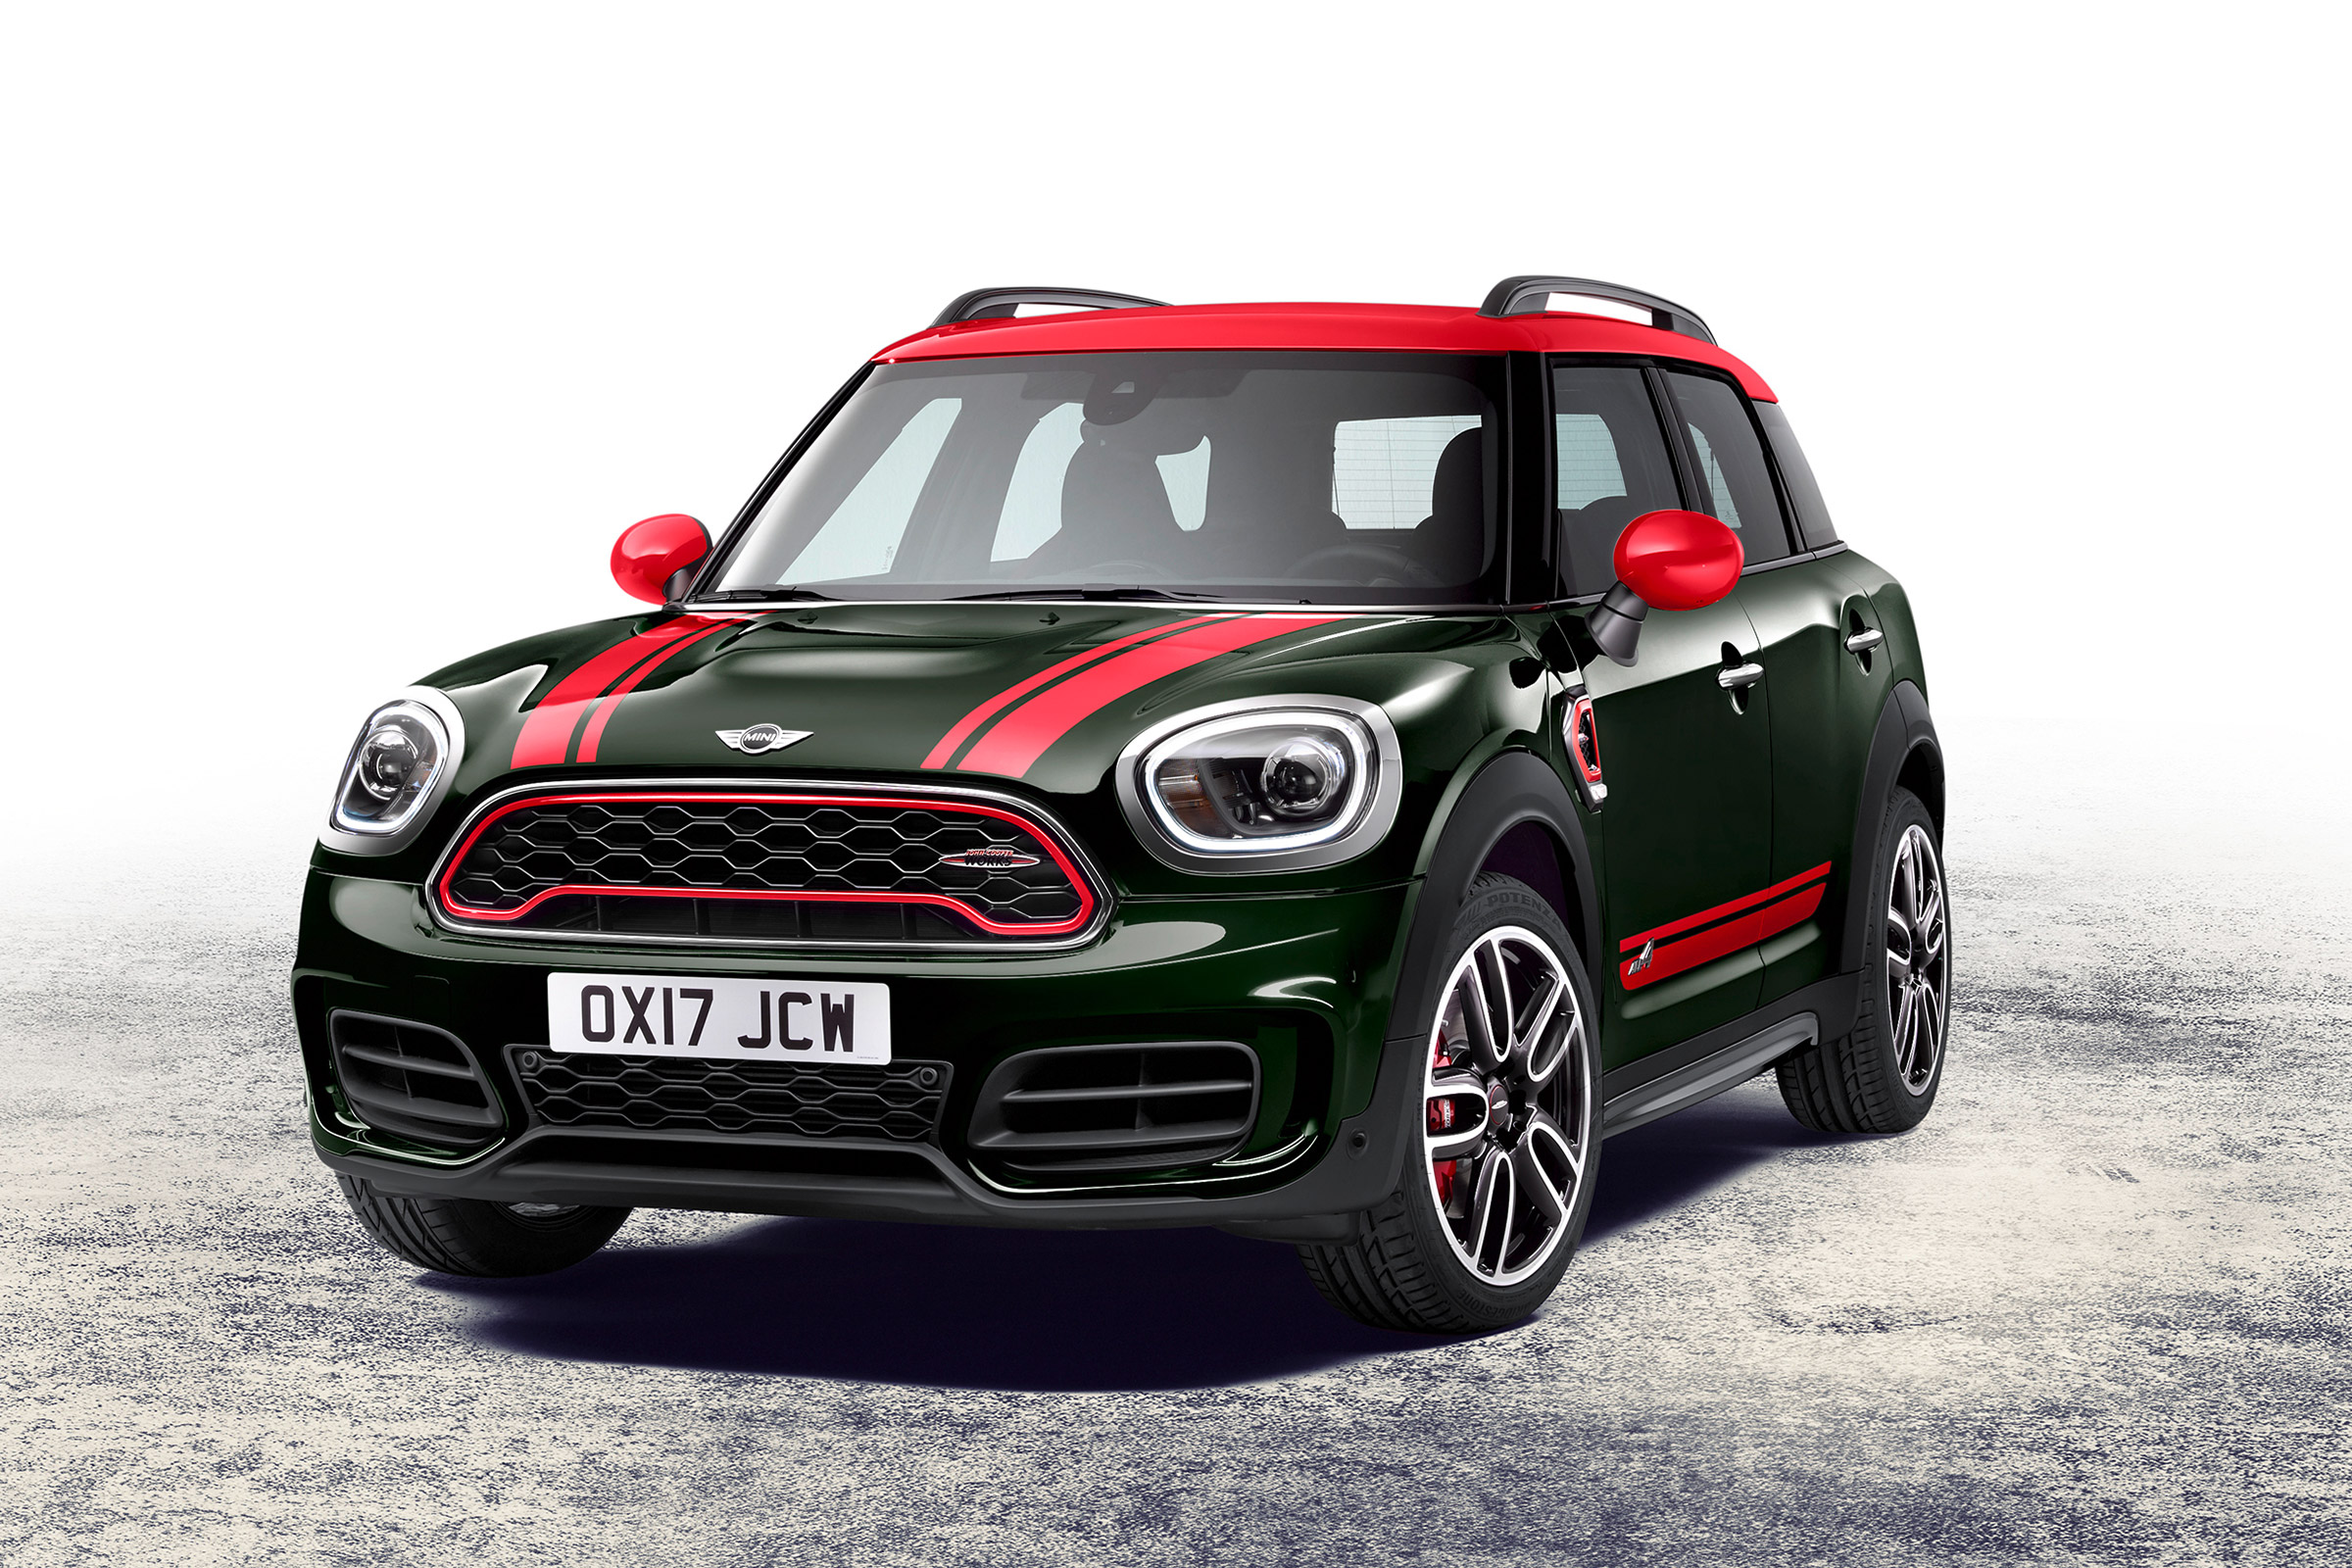 New 2017 MINI JCW Countryman official images and details Auto Express